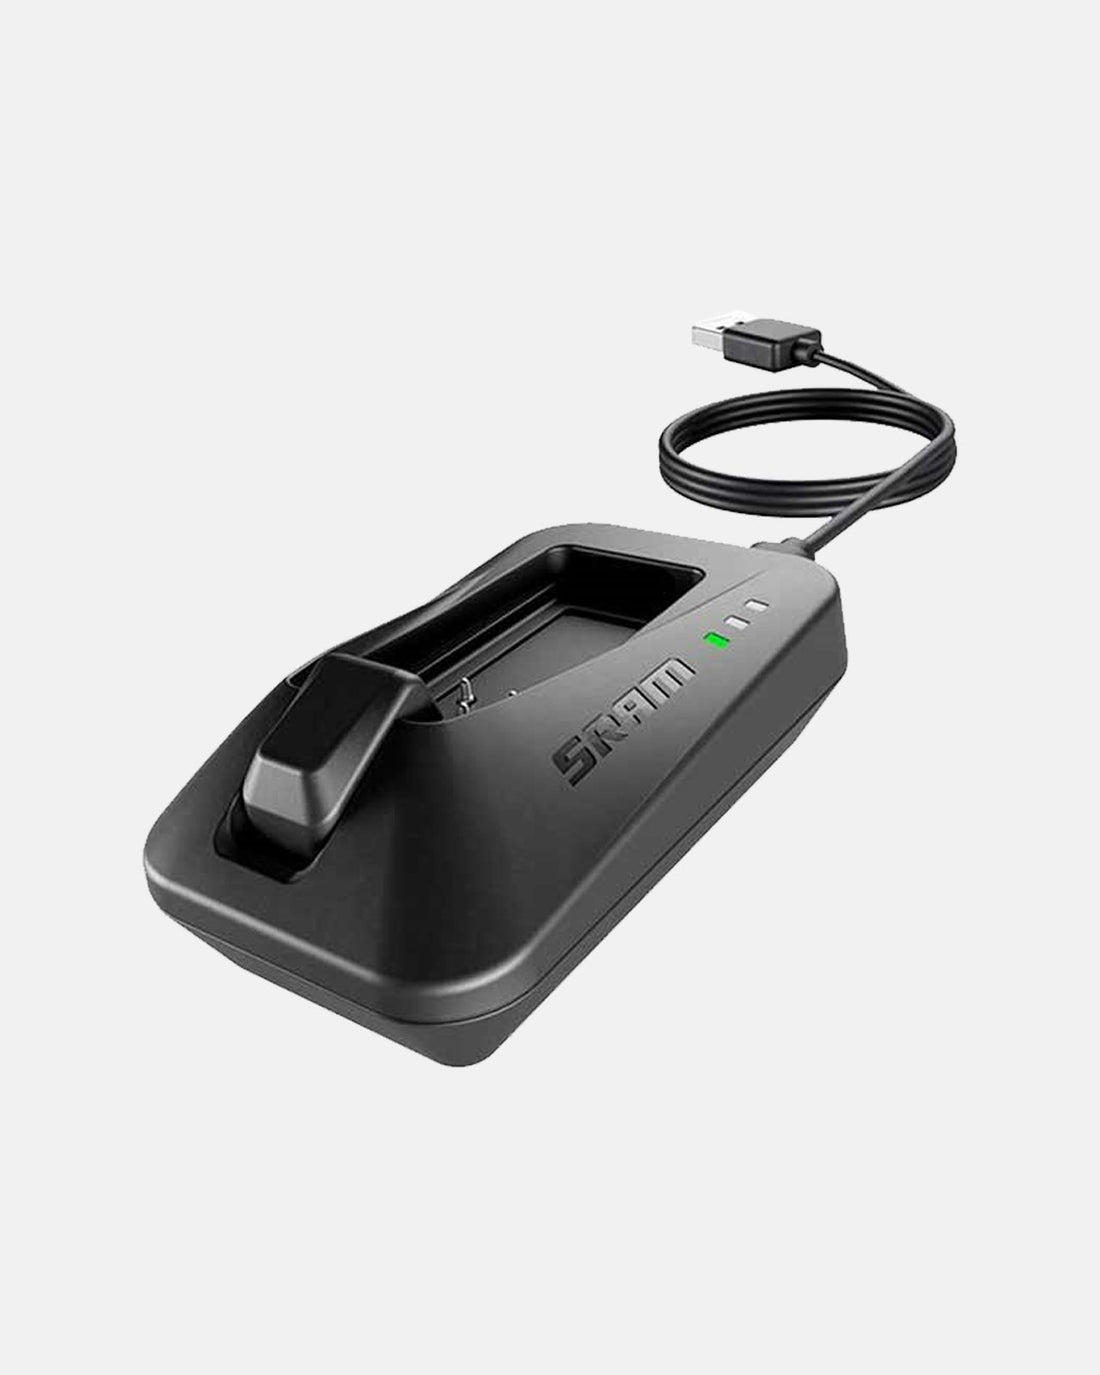 SRAM Etap - Battery charger and cord